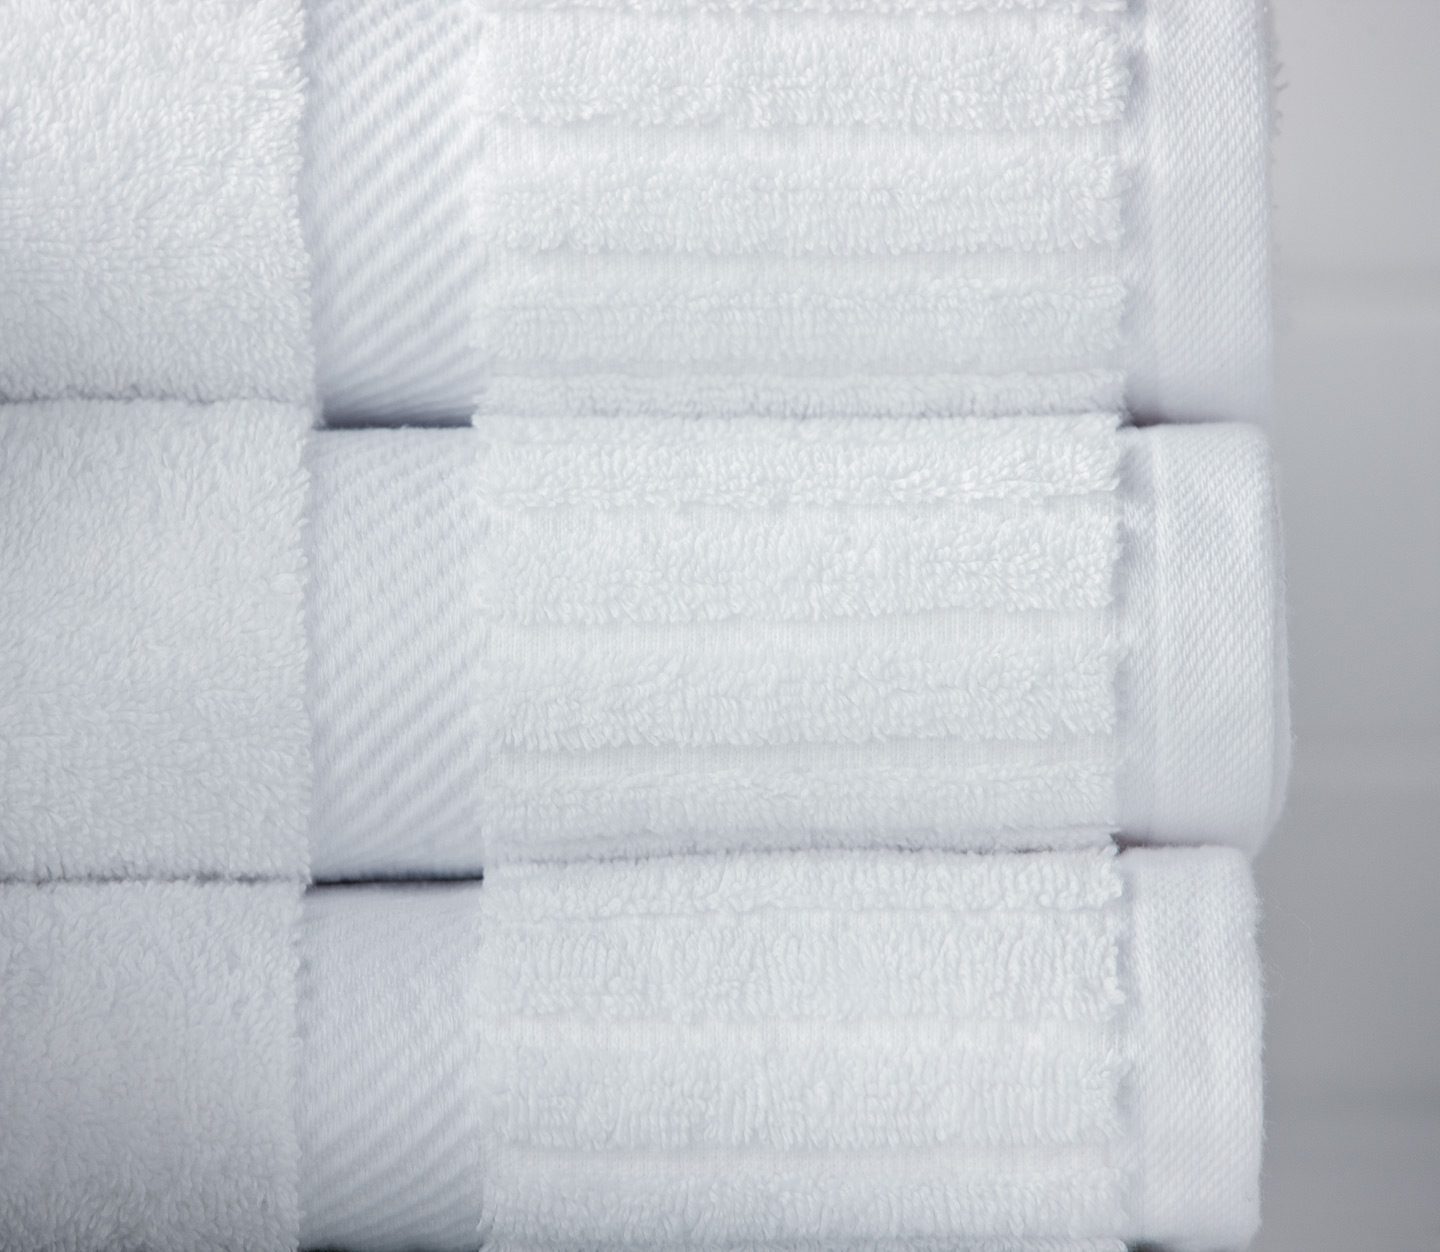 Luxury Terry Towel Sets - Vidori Collection | Standard Textile